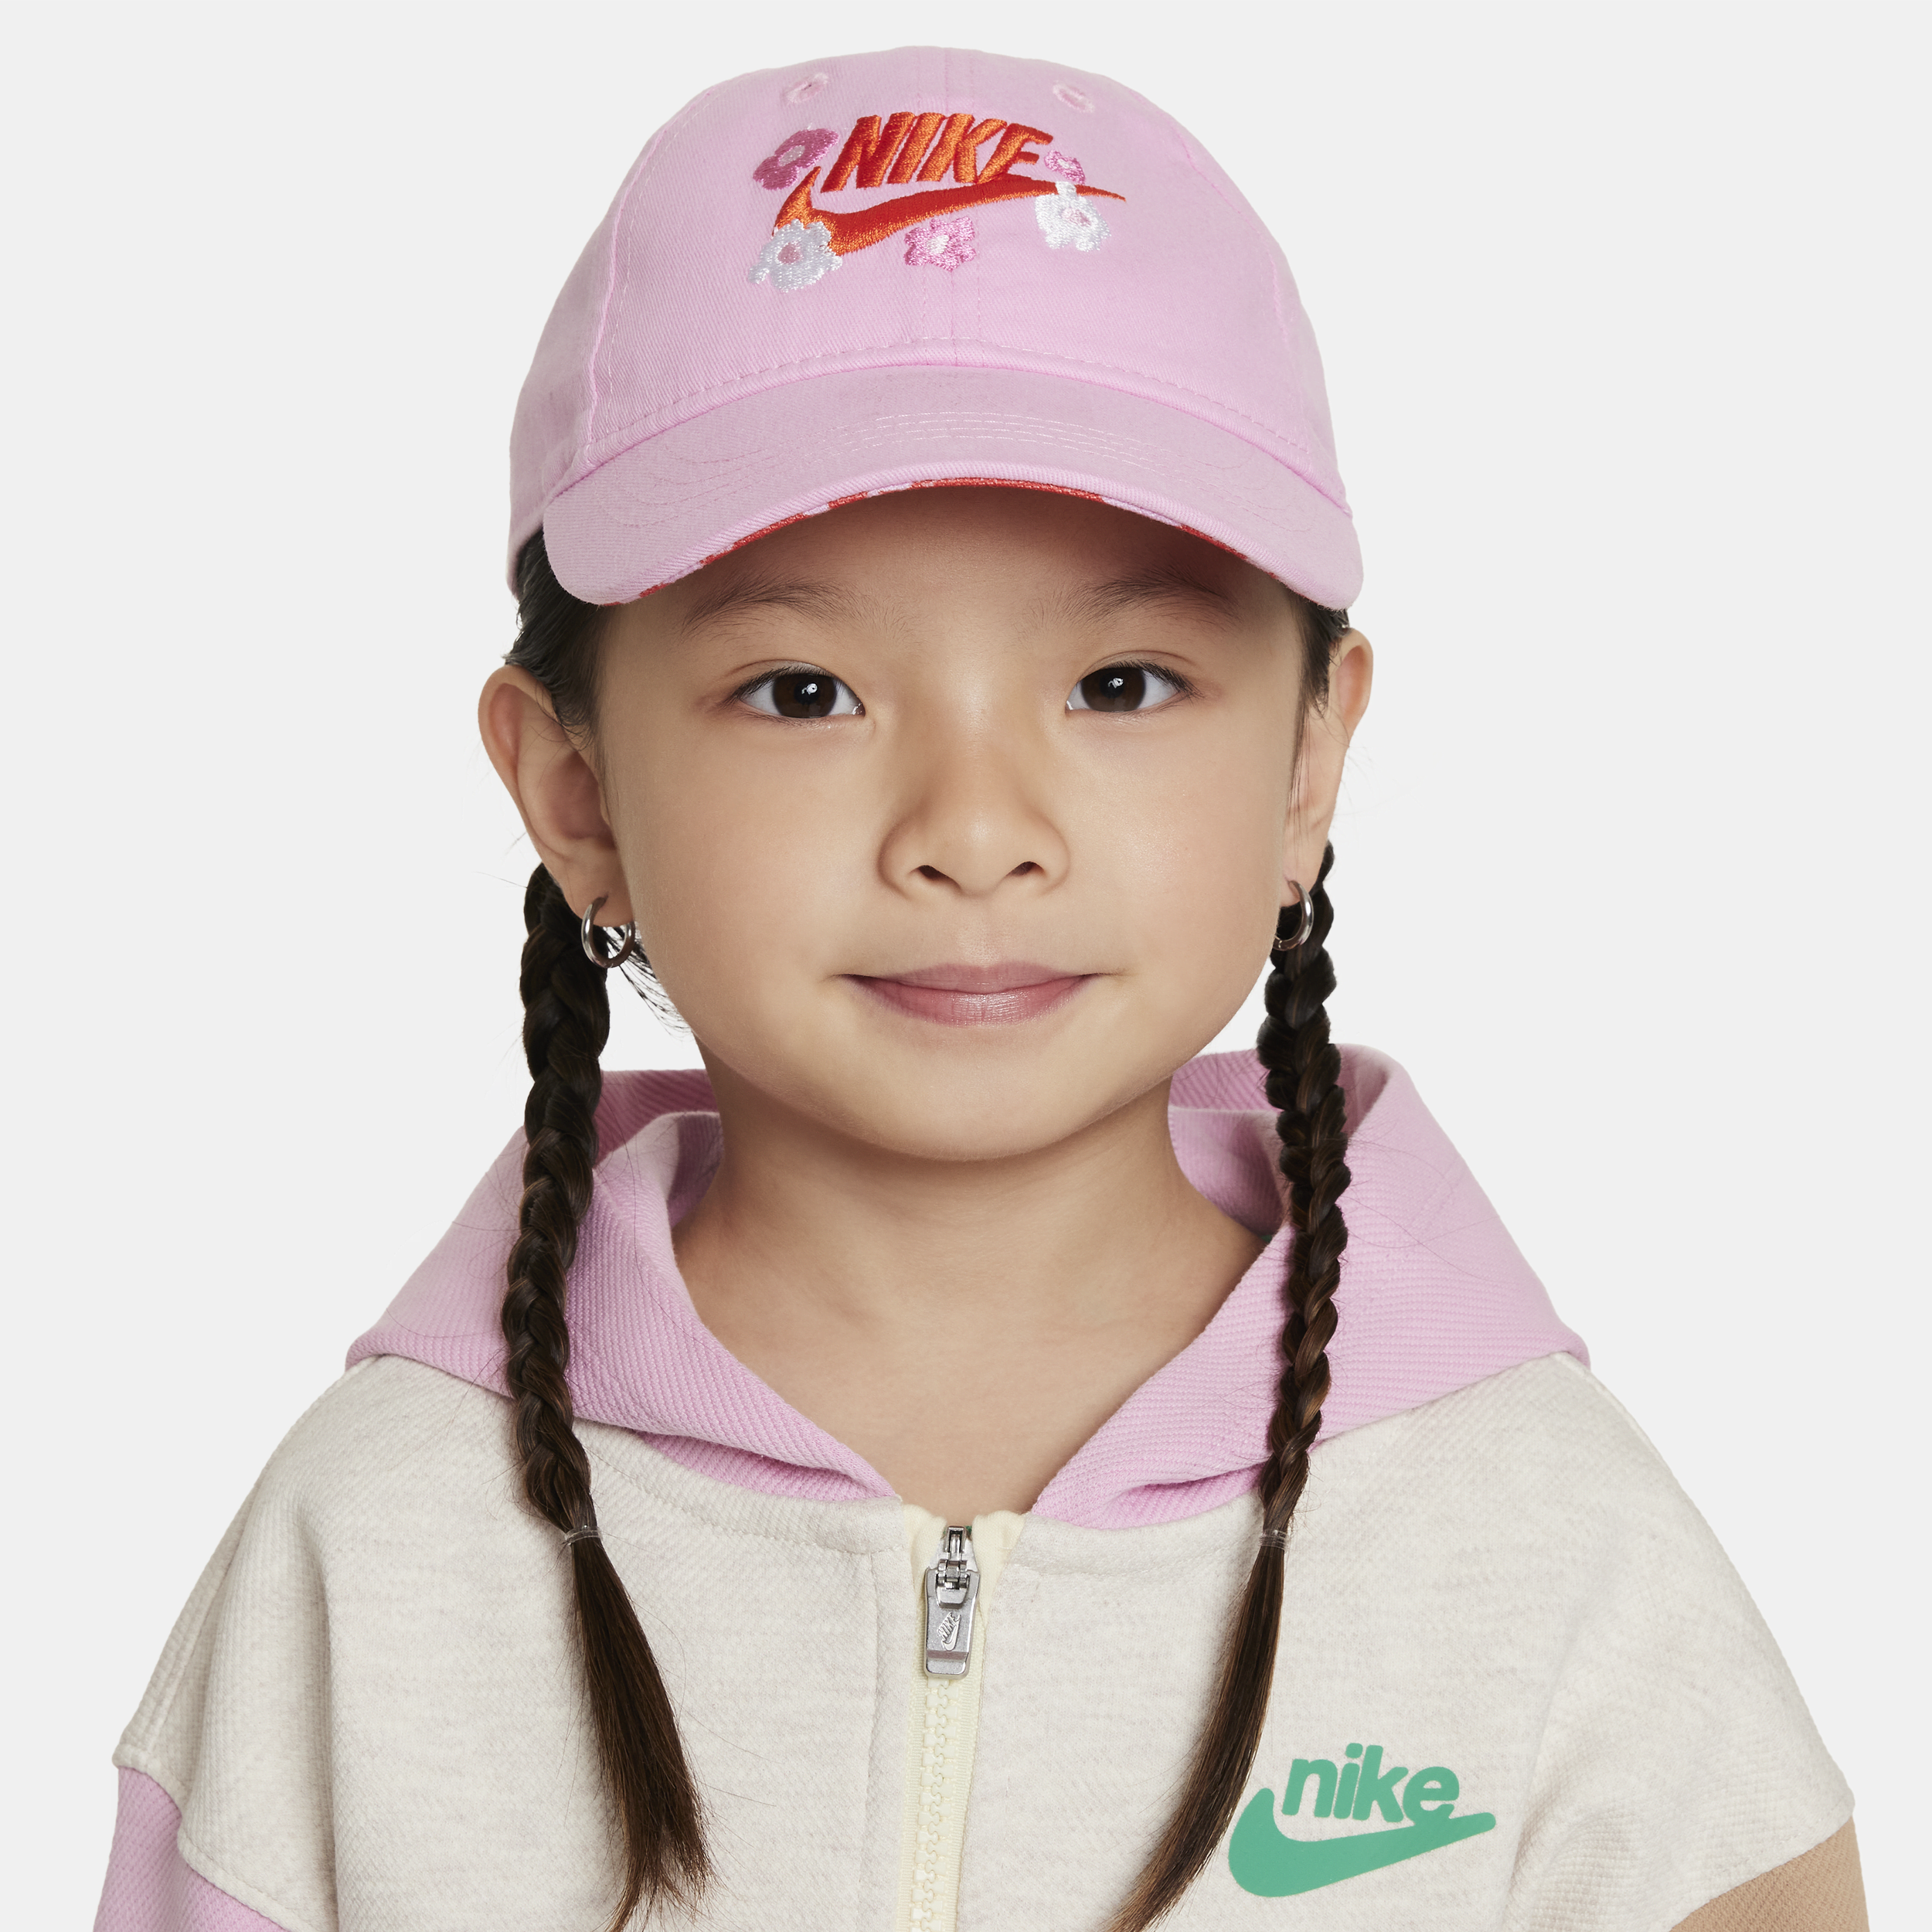 Nike Babies' "your Move" Toddler Cap In Pink